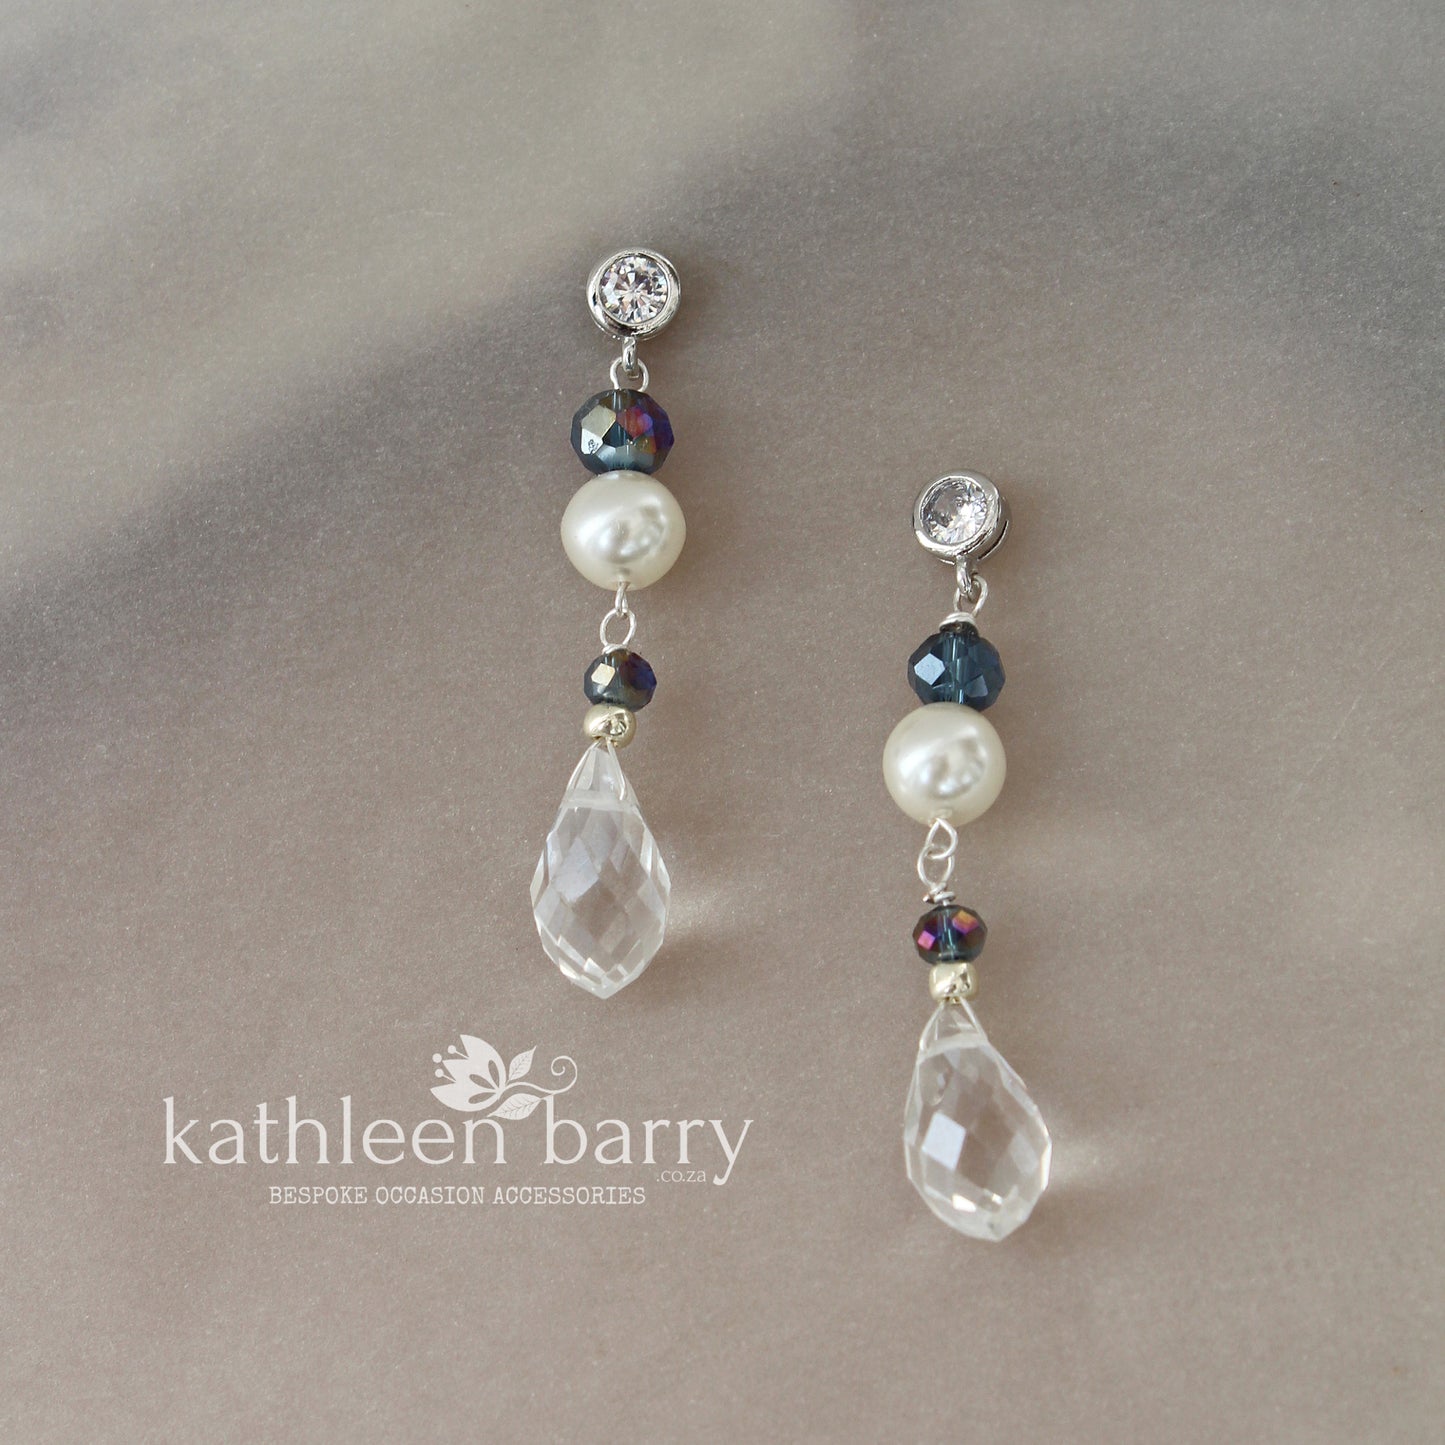 Clare crystal and pearl bridal drop earrings Color options available - silver, gold or rose gold